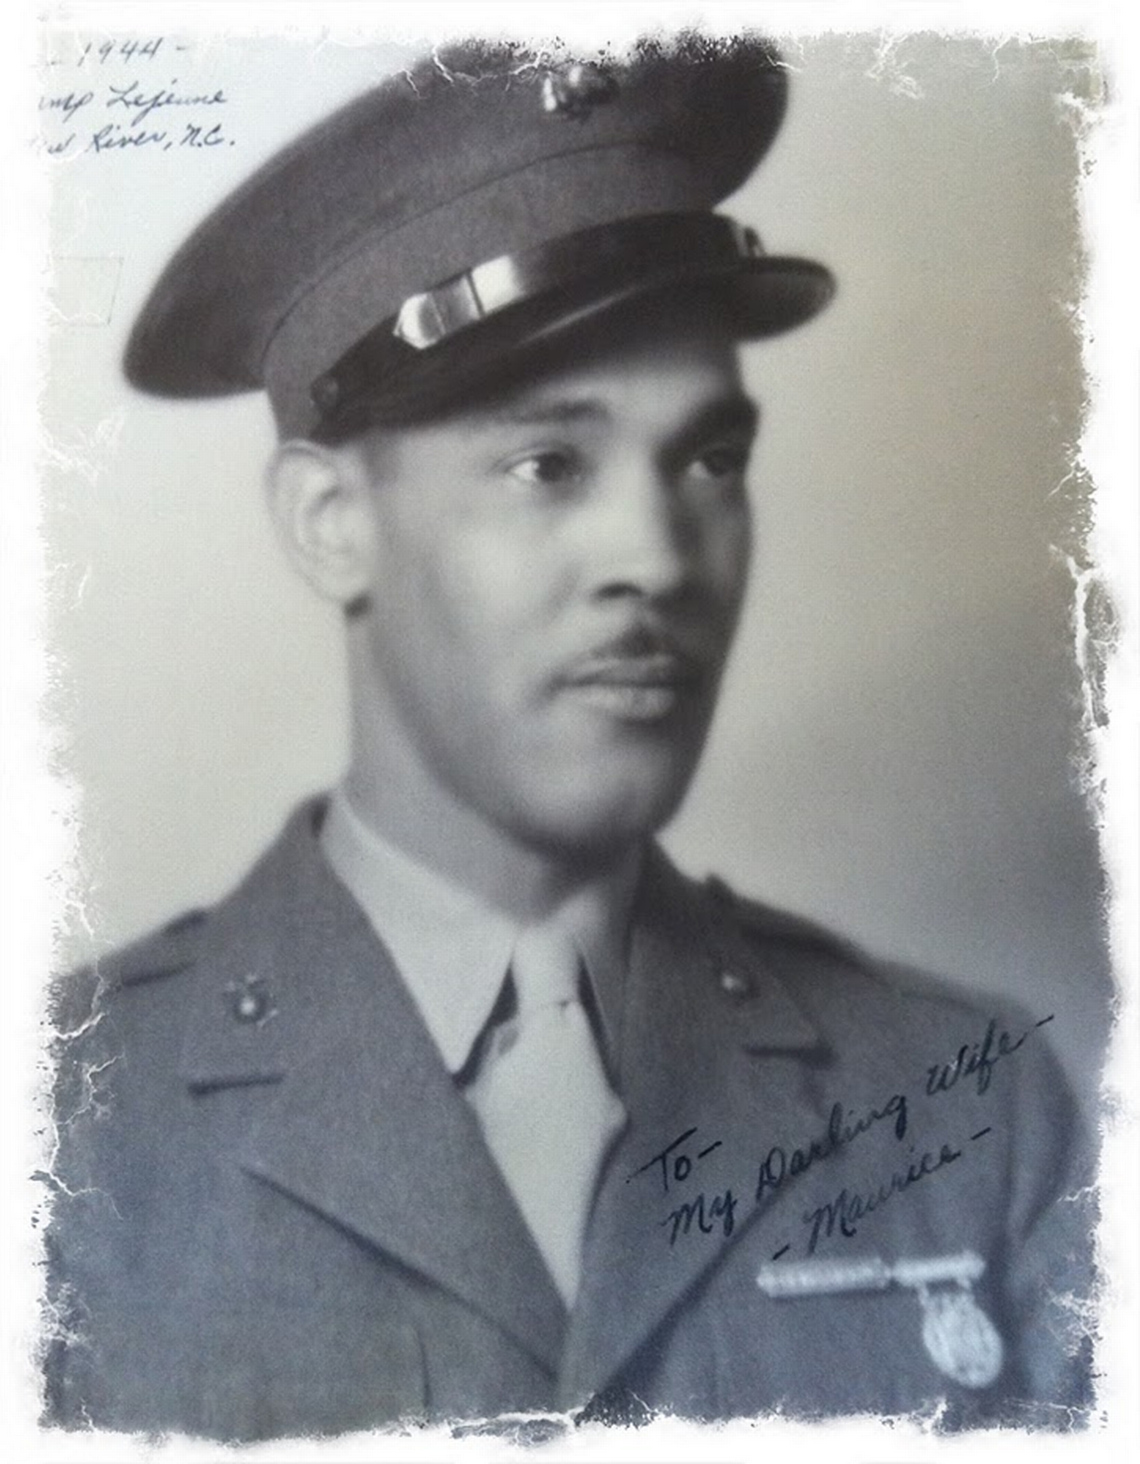 A photo of Marine Corps Pvt. Maurice Burns with a note to his wife written on it.